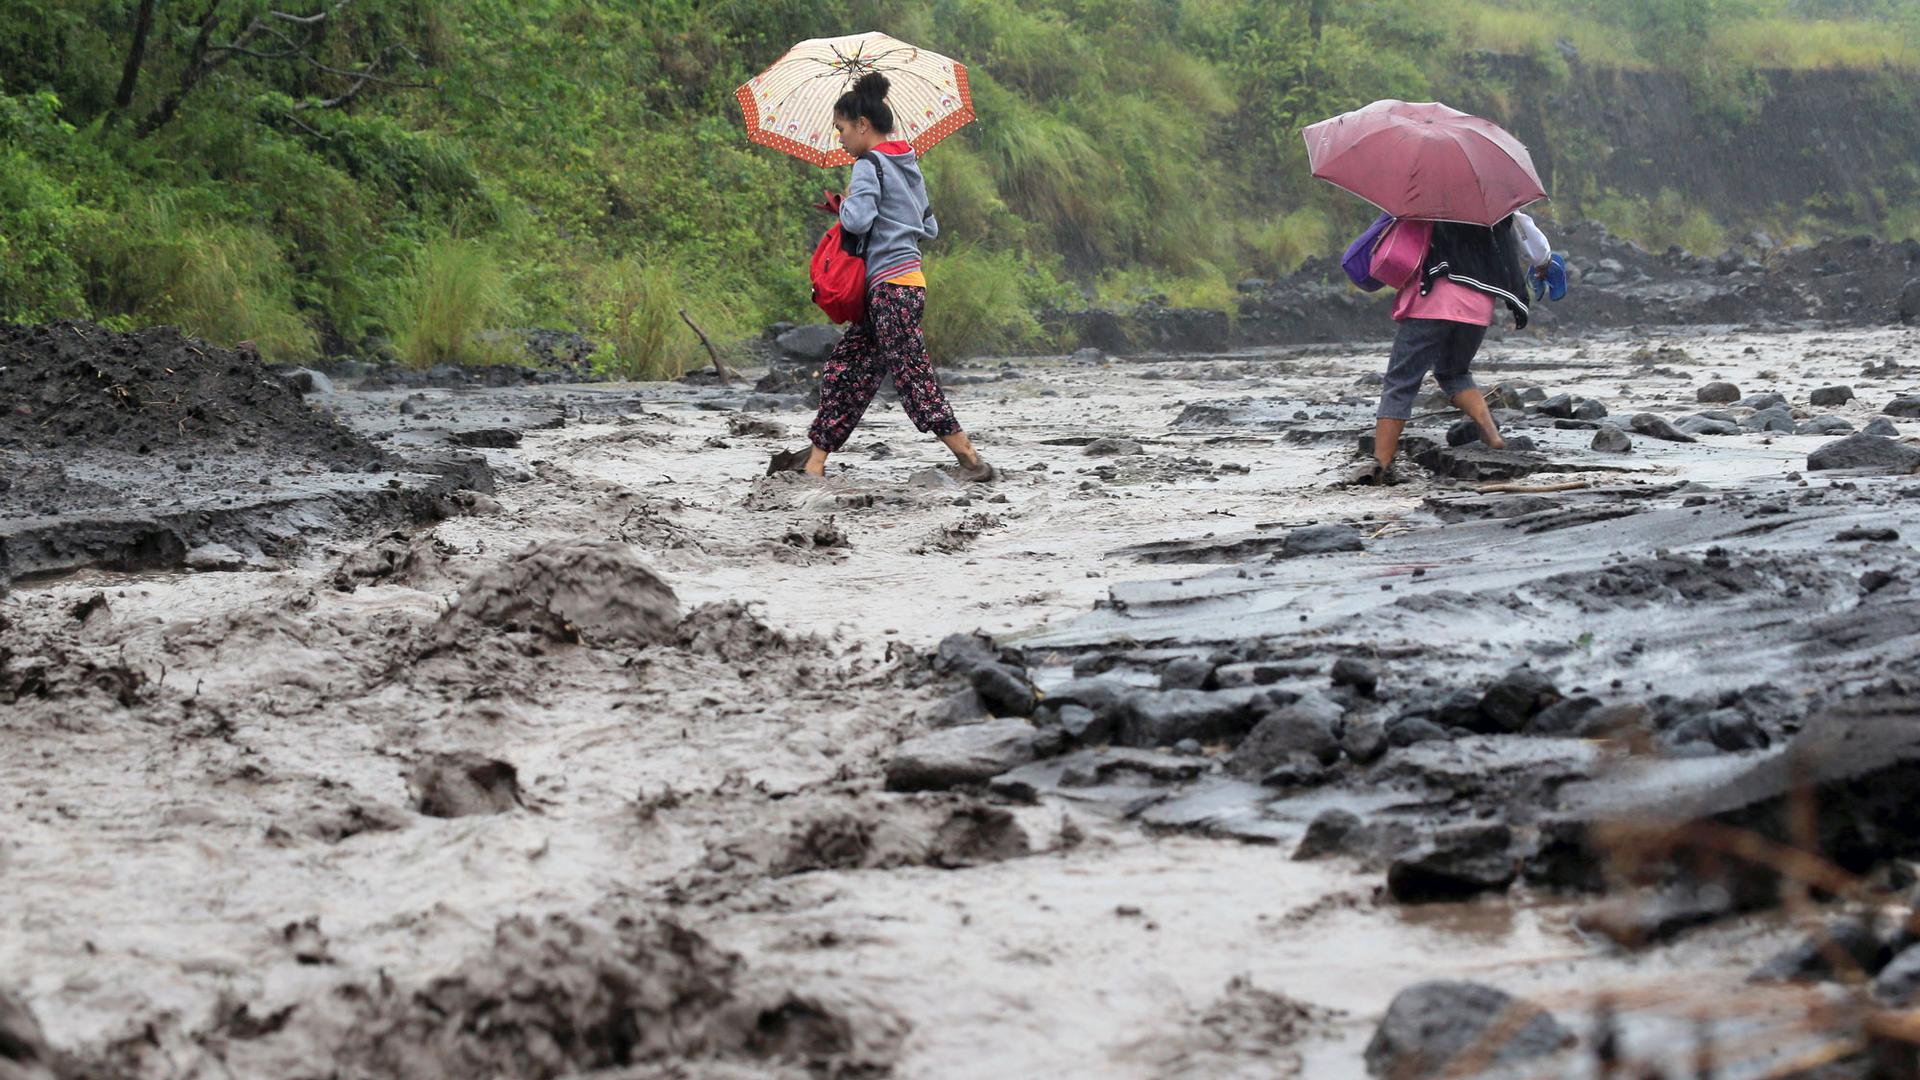 Two women hold pink and orange umbrellas as they carefully walk through a flooded area of dark earth, which is dark with volcanic ash.